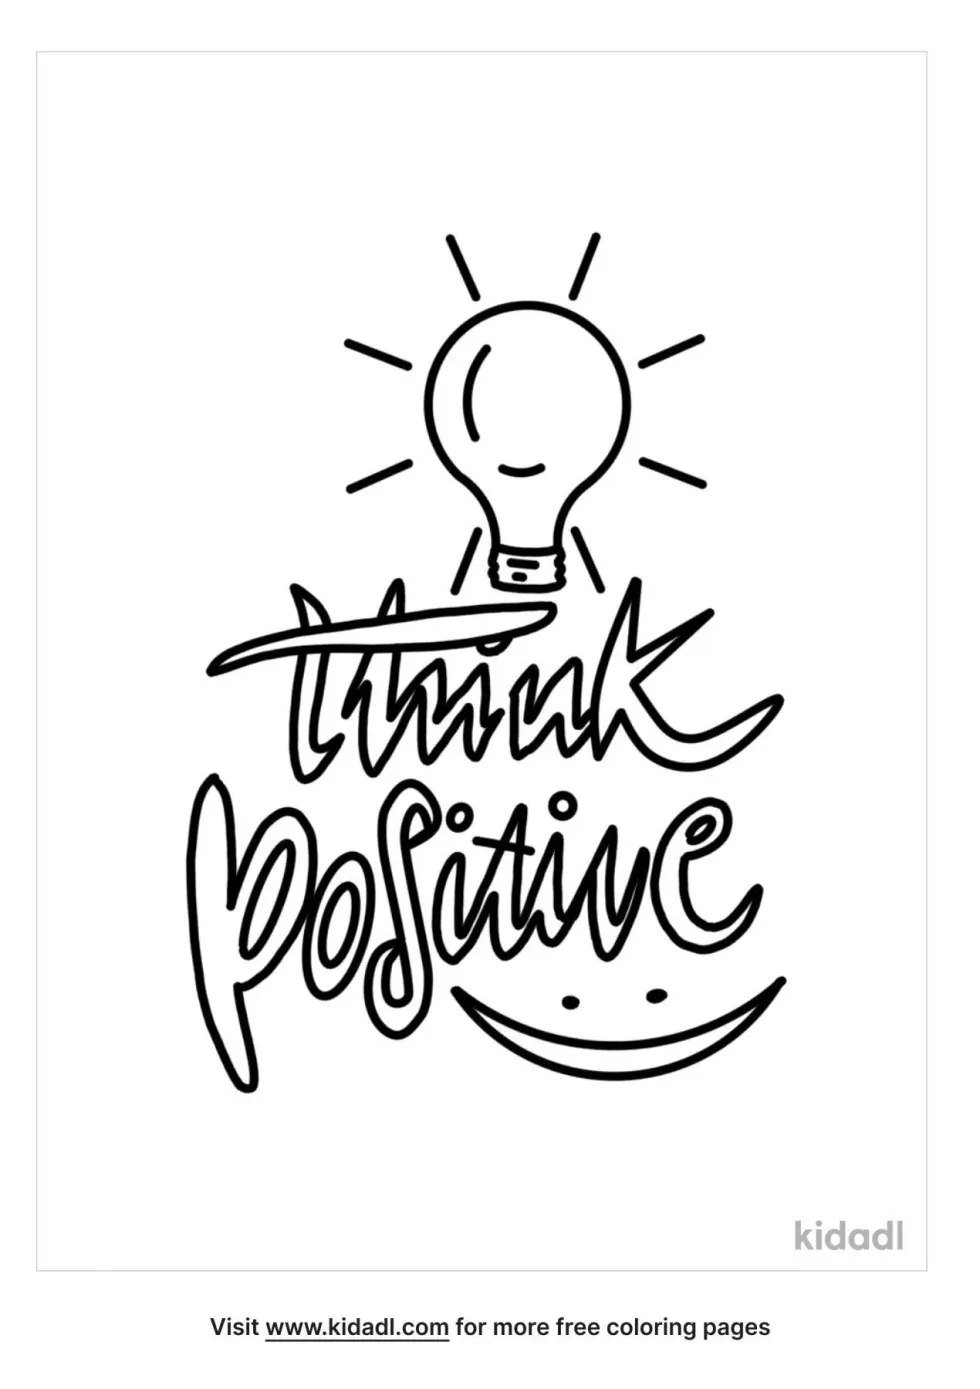 Think Positive Coloring Page